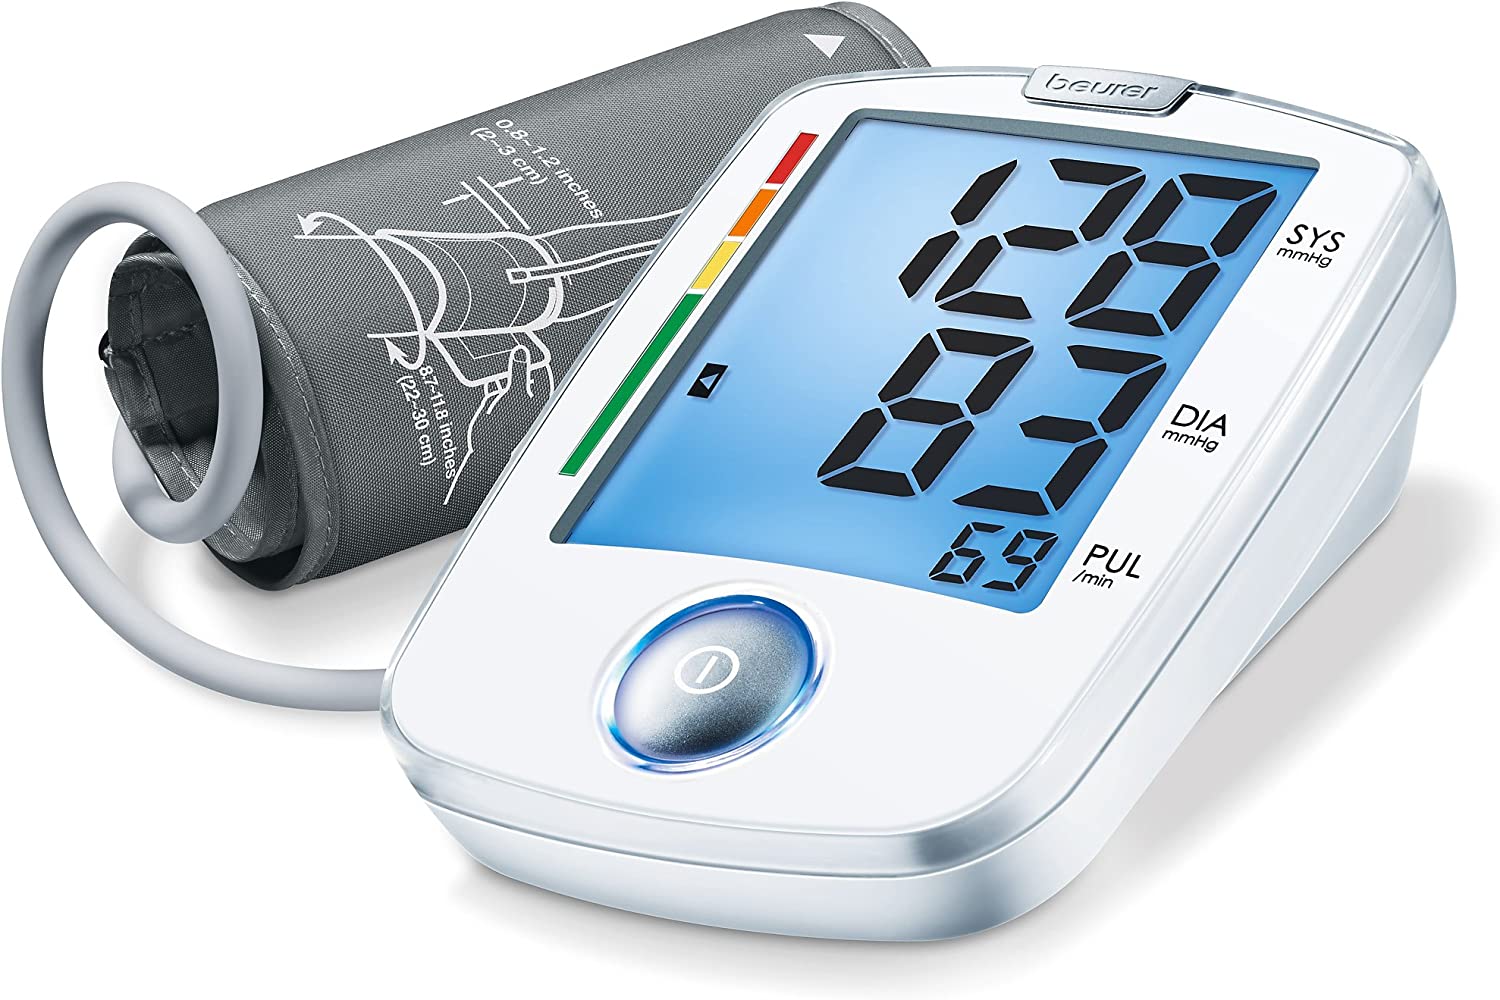 Beurer BM 44 Fully Automatic Upper Arm Blood Pressure and Pulse Monitor with One Button Operation for Easy Application